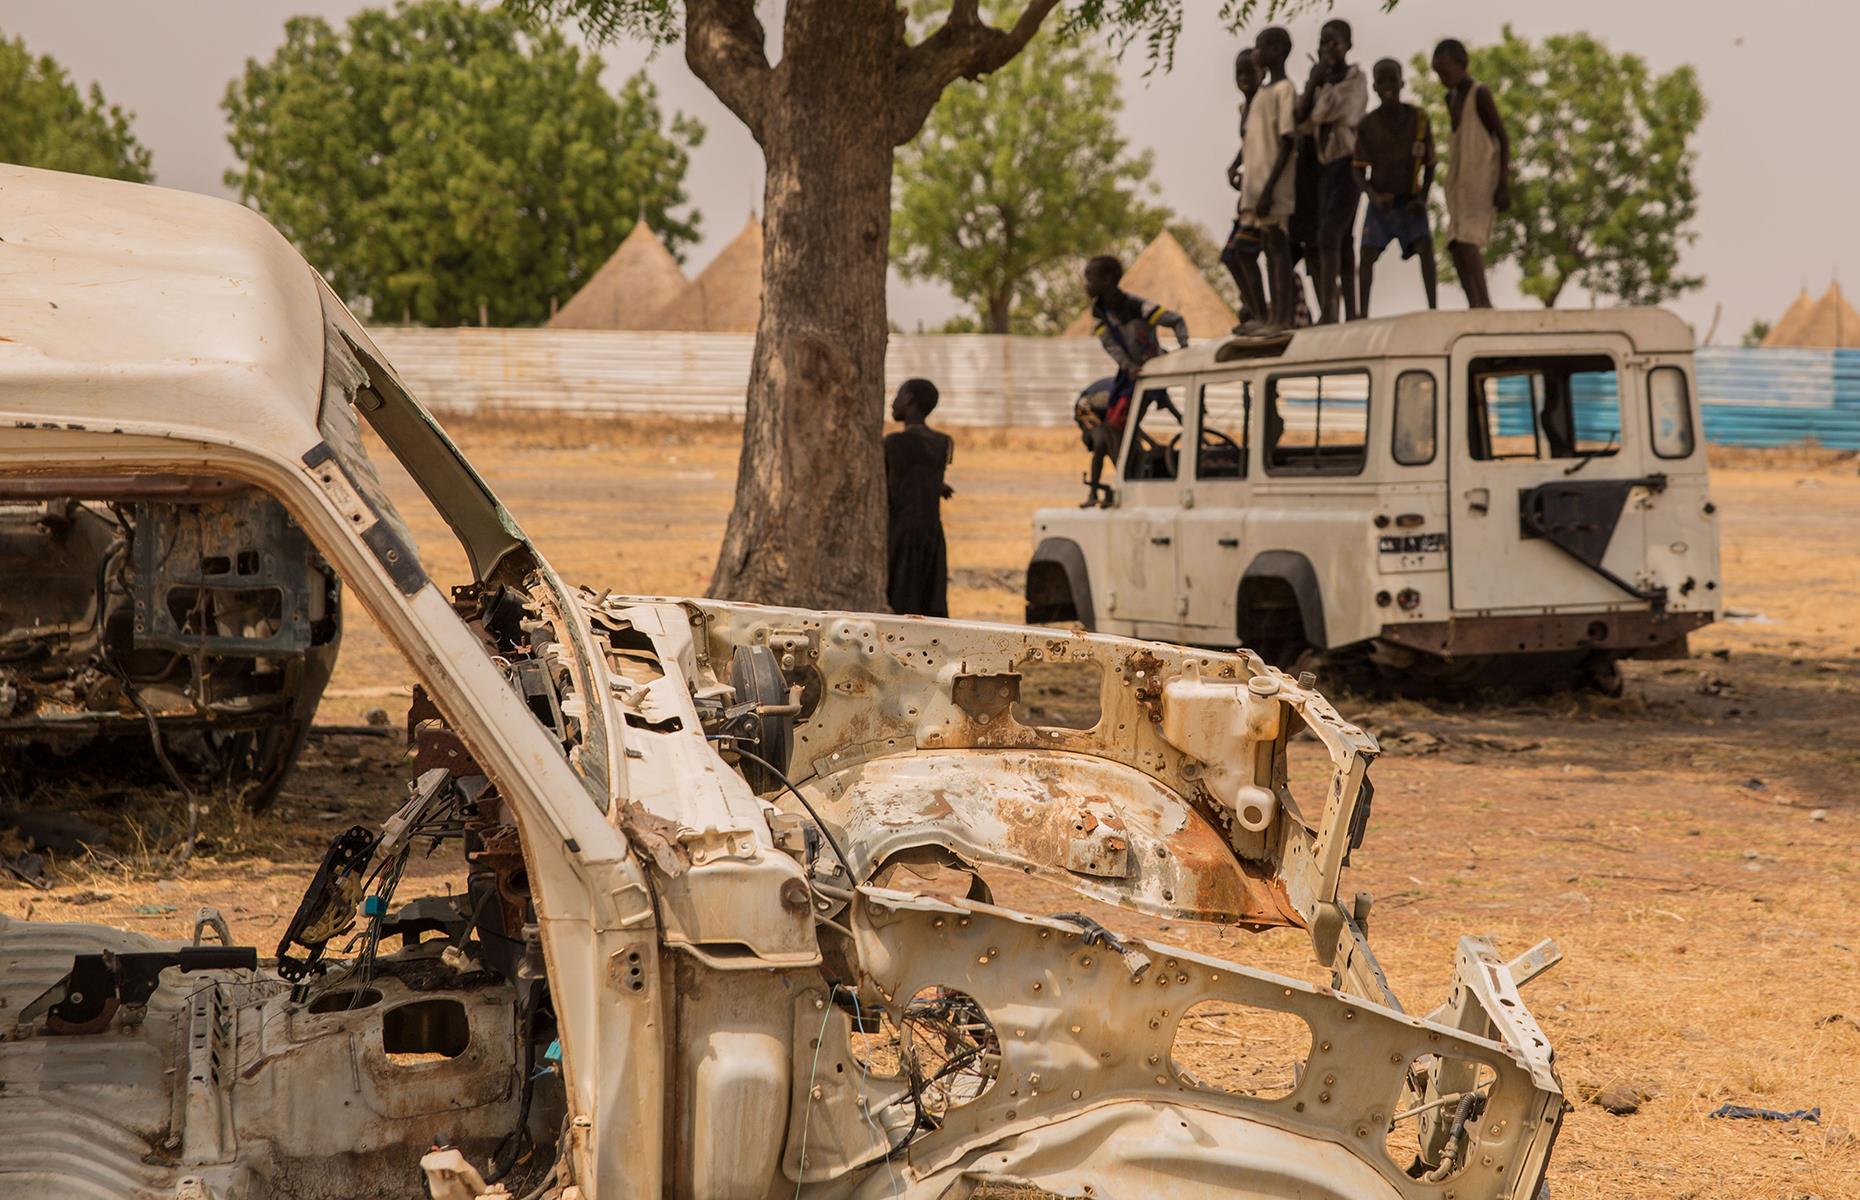 <p>The world’s newest country, South Sudan is sadly also one of the most dangerous. The country broke from Sudan in 2011 but a civil war broke out just two years later, and while a peace deal was signed in 2018 <a href="https://www.hrw.org/news/2021/07/09/south-sudan-crossroads">armed conflict and human rights abuses continue unabated</a>. That said, in 2022 the country recorded its lowest homicide rate since independence, and its peacefulness rating did improve slightly in this year’s GPI.</p>